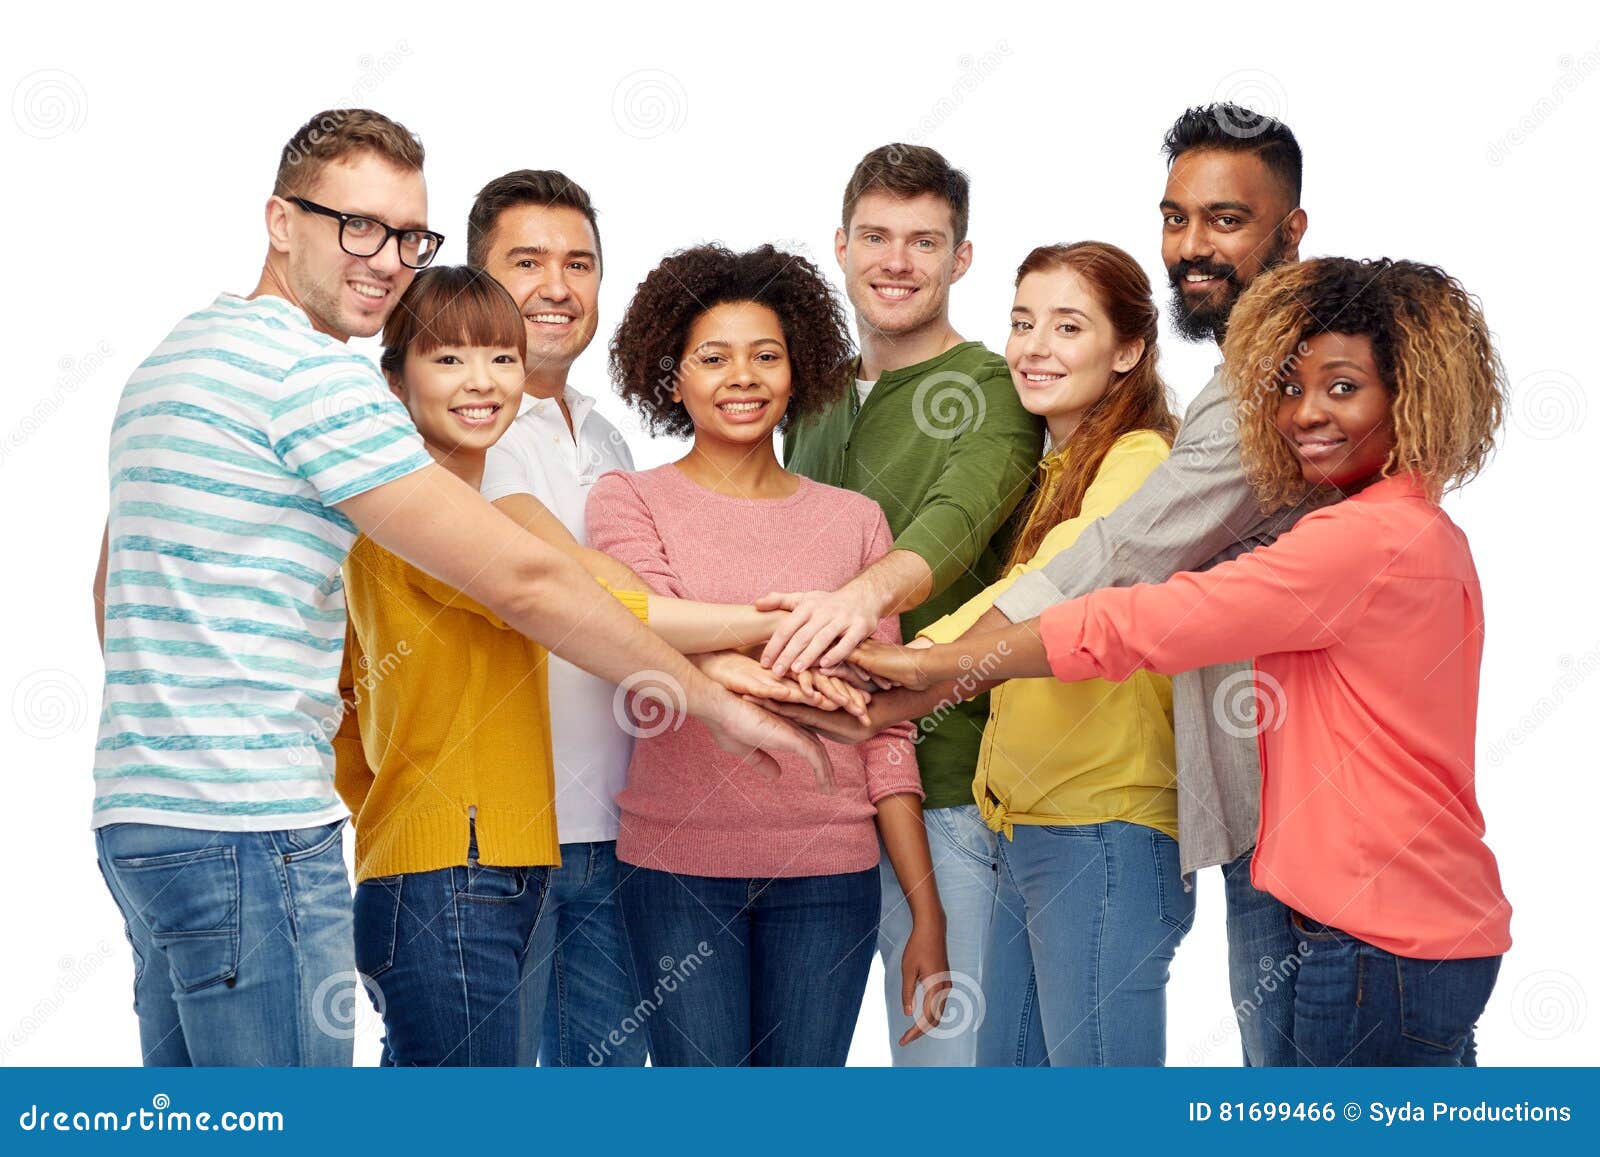 international group of happy people holding hands